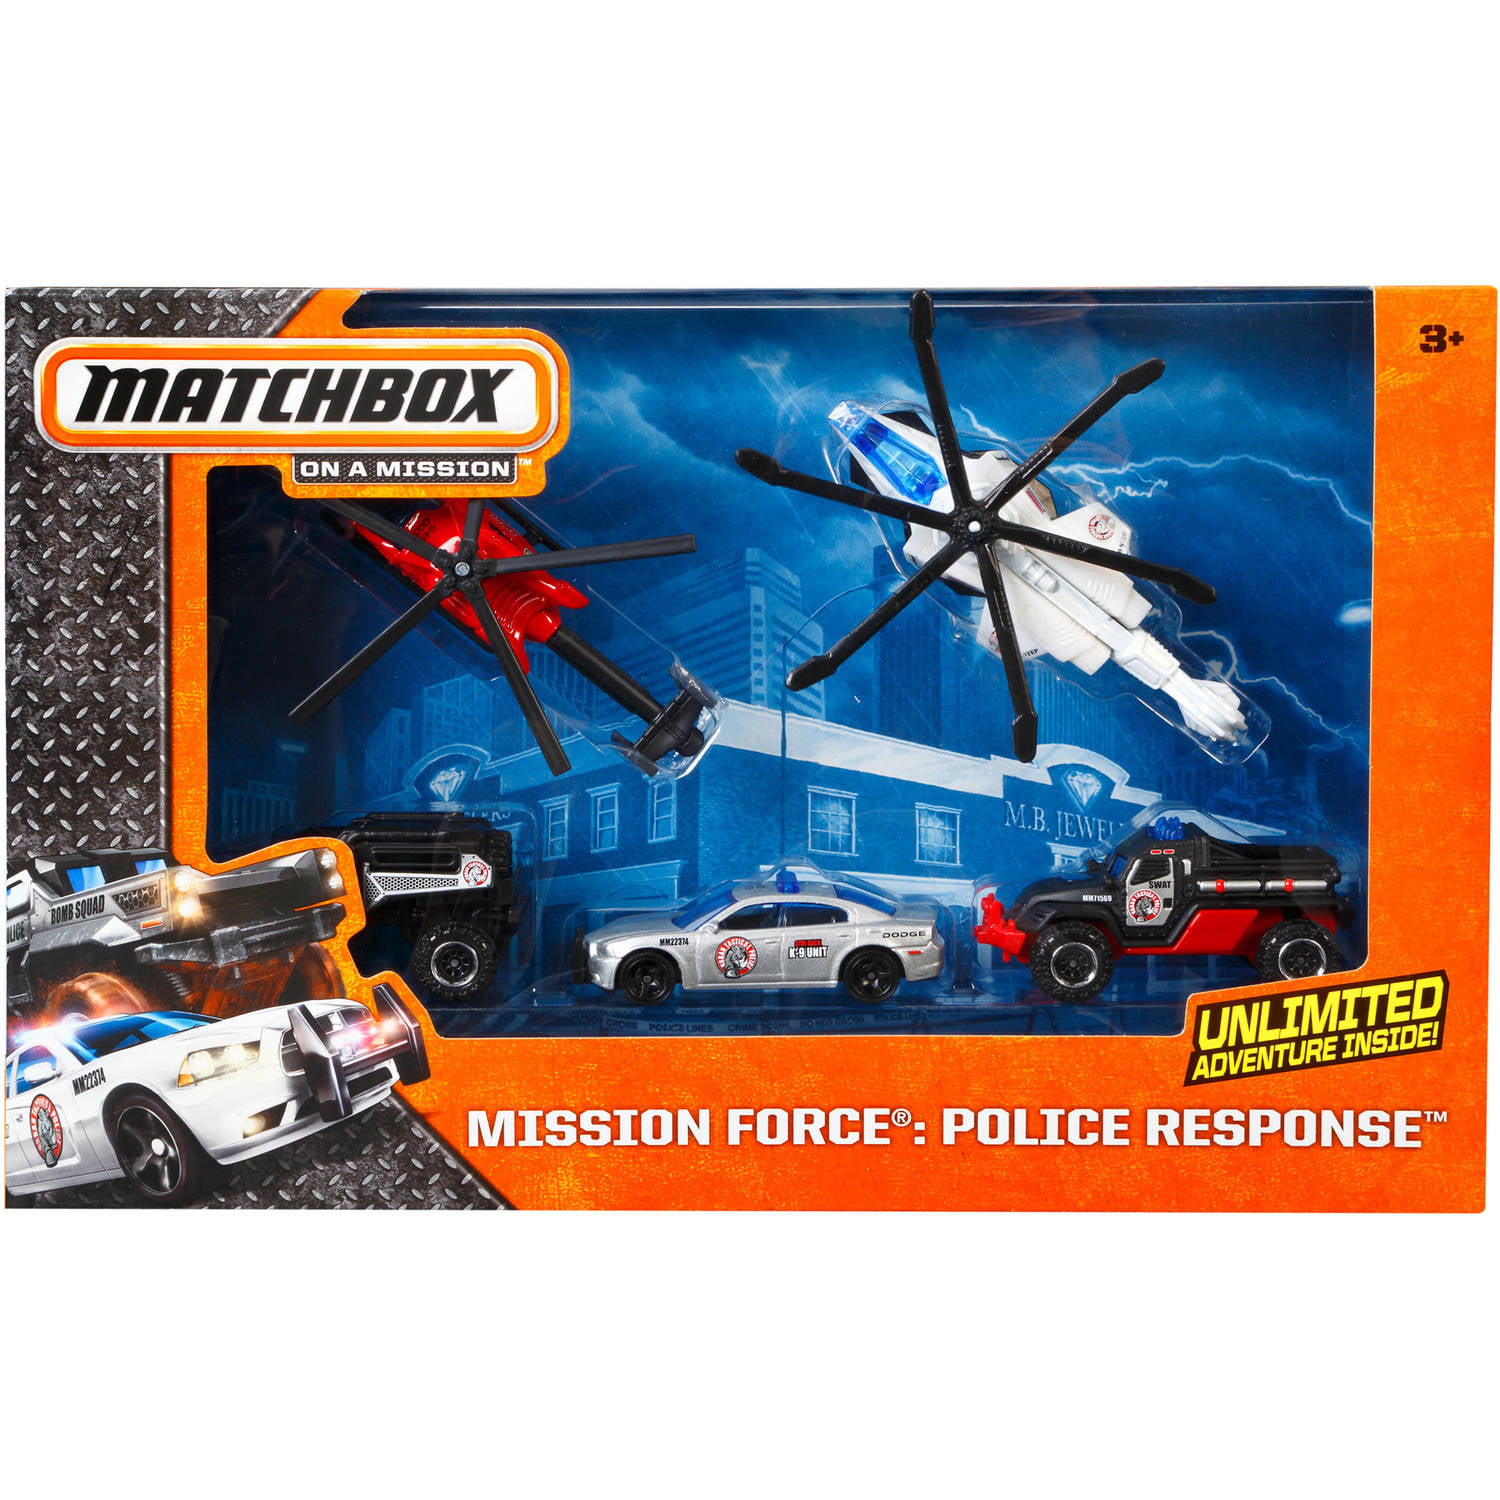 Strike Squad & Police Response Playset *NEW* Lot Of 2 Matchbox Mission Force 